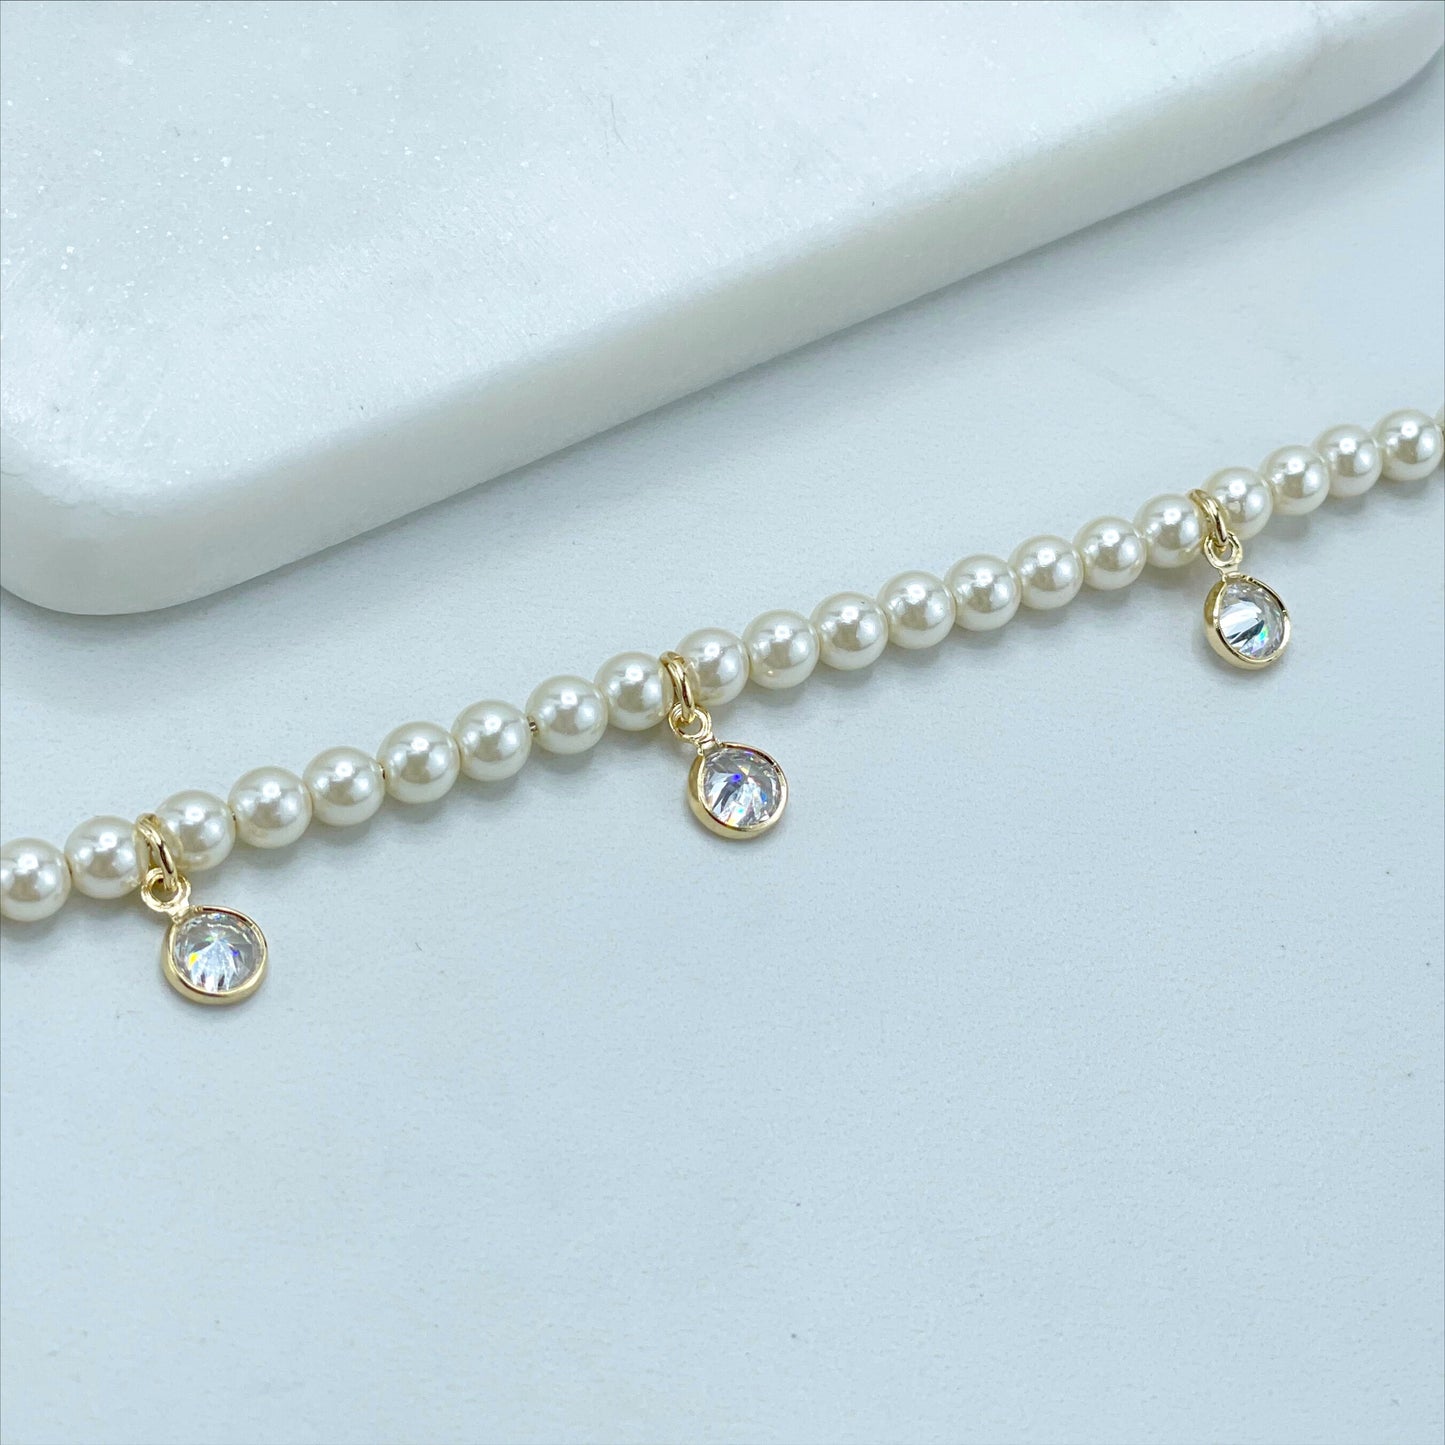 18k Gold Filled 4mm White Simulated Pearls, Width Cubic Zirconia Necklace or Bracelet Set Wholesale Jewelry Supplies